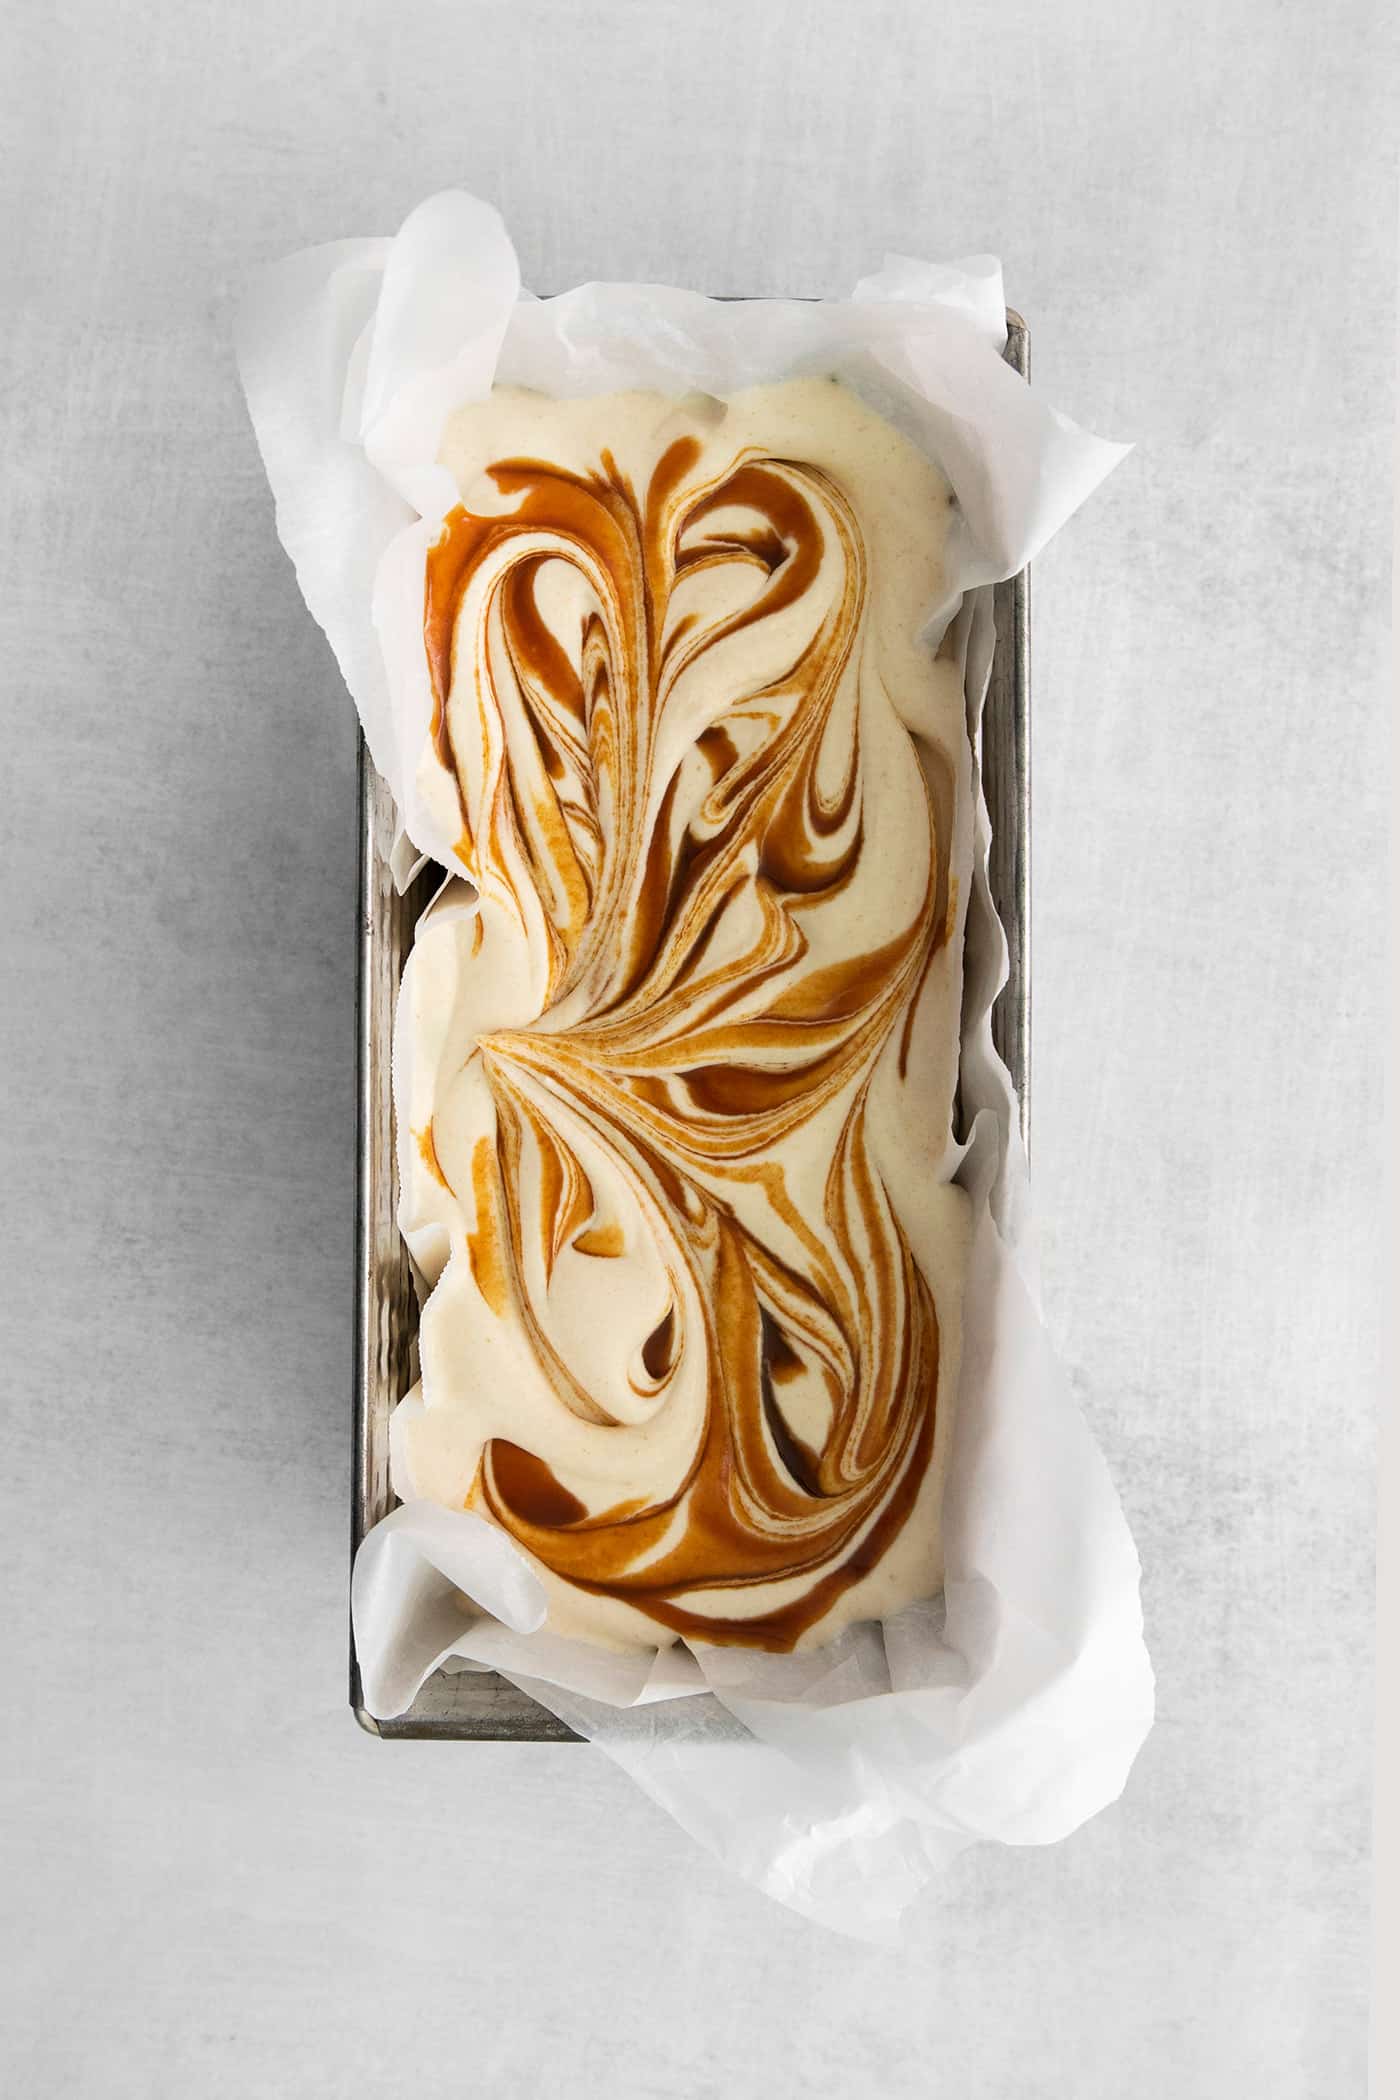 Salted caramel ice cream in a loaf pan